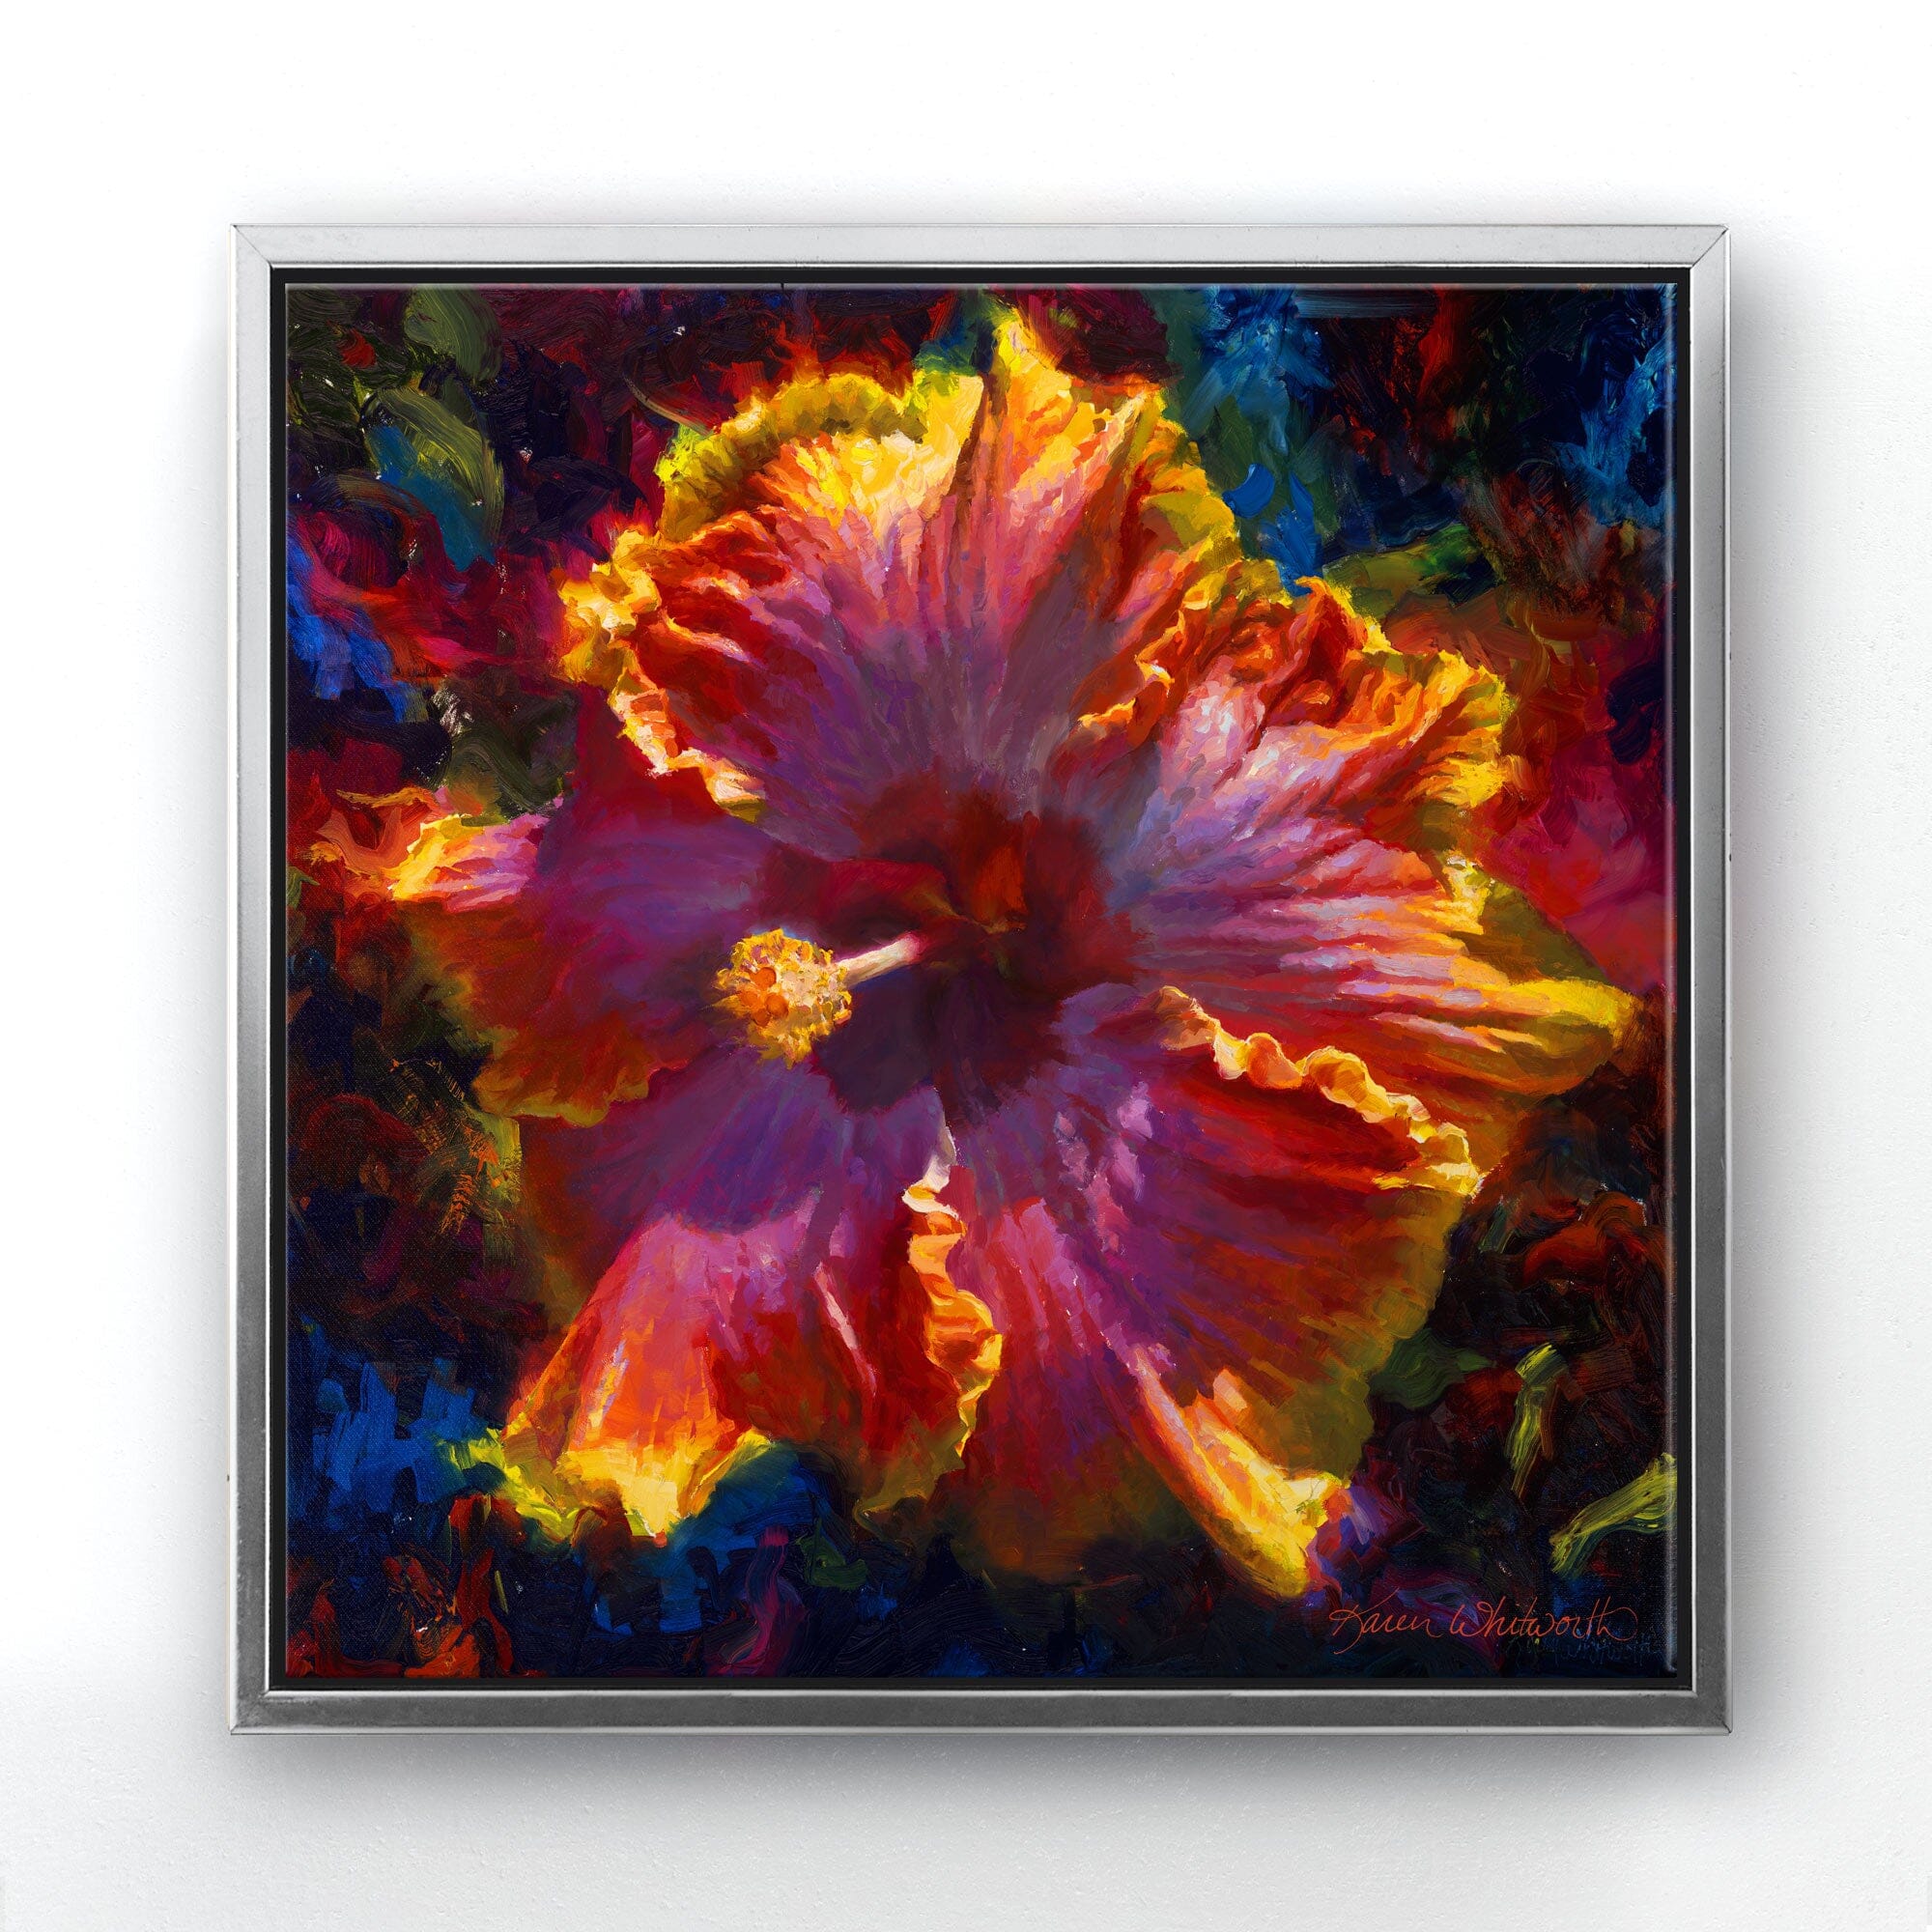 Square canvas wall art in a contemporary silver minimalist frame. The artwork is a painting by Karen Whitworth of a large Hawaiian hibiscus flower, painted in a lively impressionistic style. Vibrant colors and brushstrokes swirl around the flower in a dark background. The painting is hanging on a white wall.